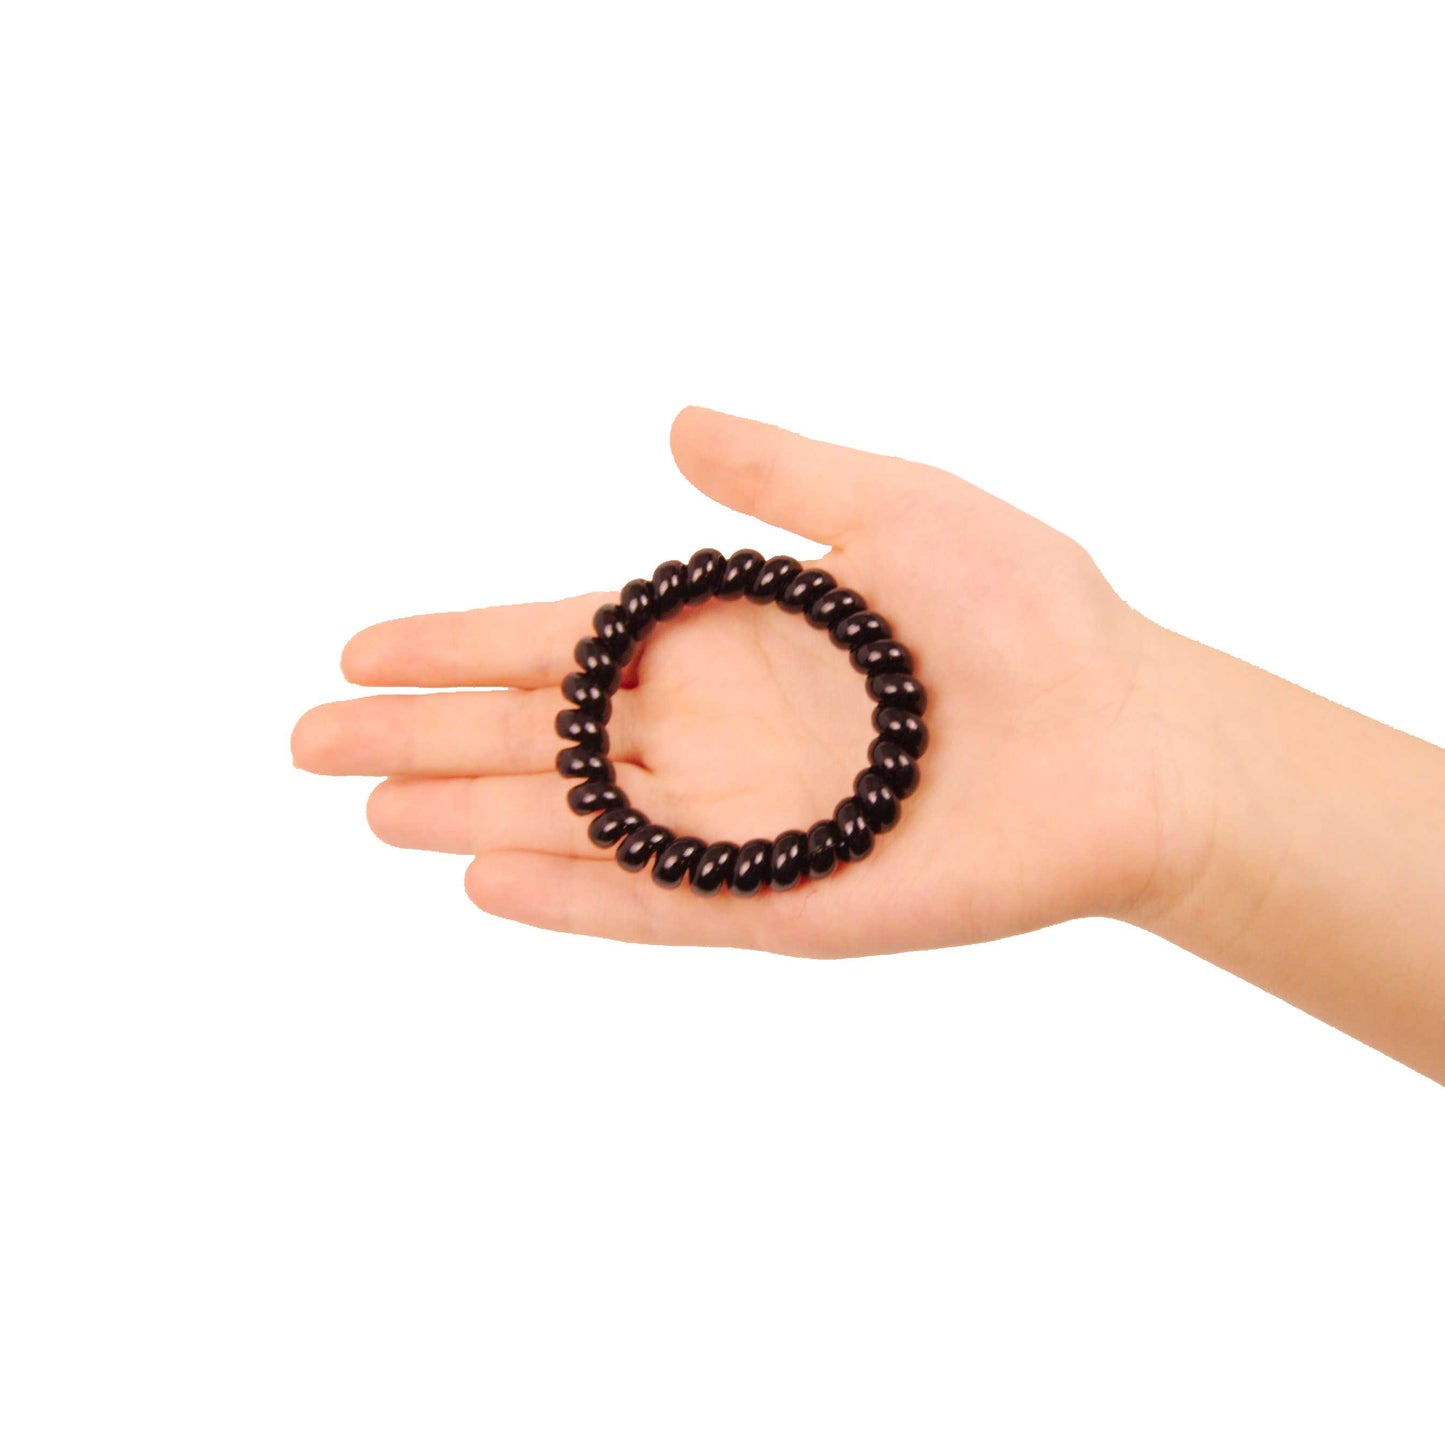 Amelia Beauty Products 8 Large Smooth Elastic Hair Coils, 2. 5in Diameter Thick Spiral Hair Ties, Gentle on Hair, Strong Hold and Minimizes Dents and Creases, Black